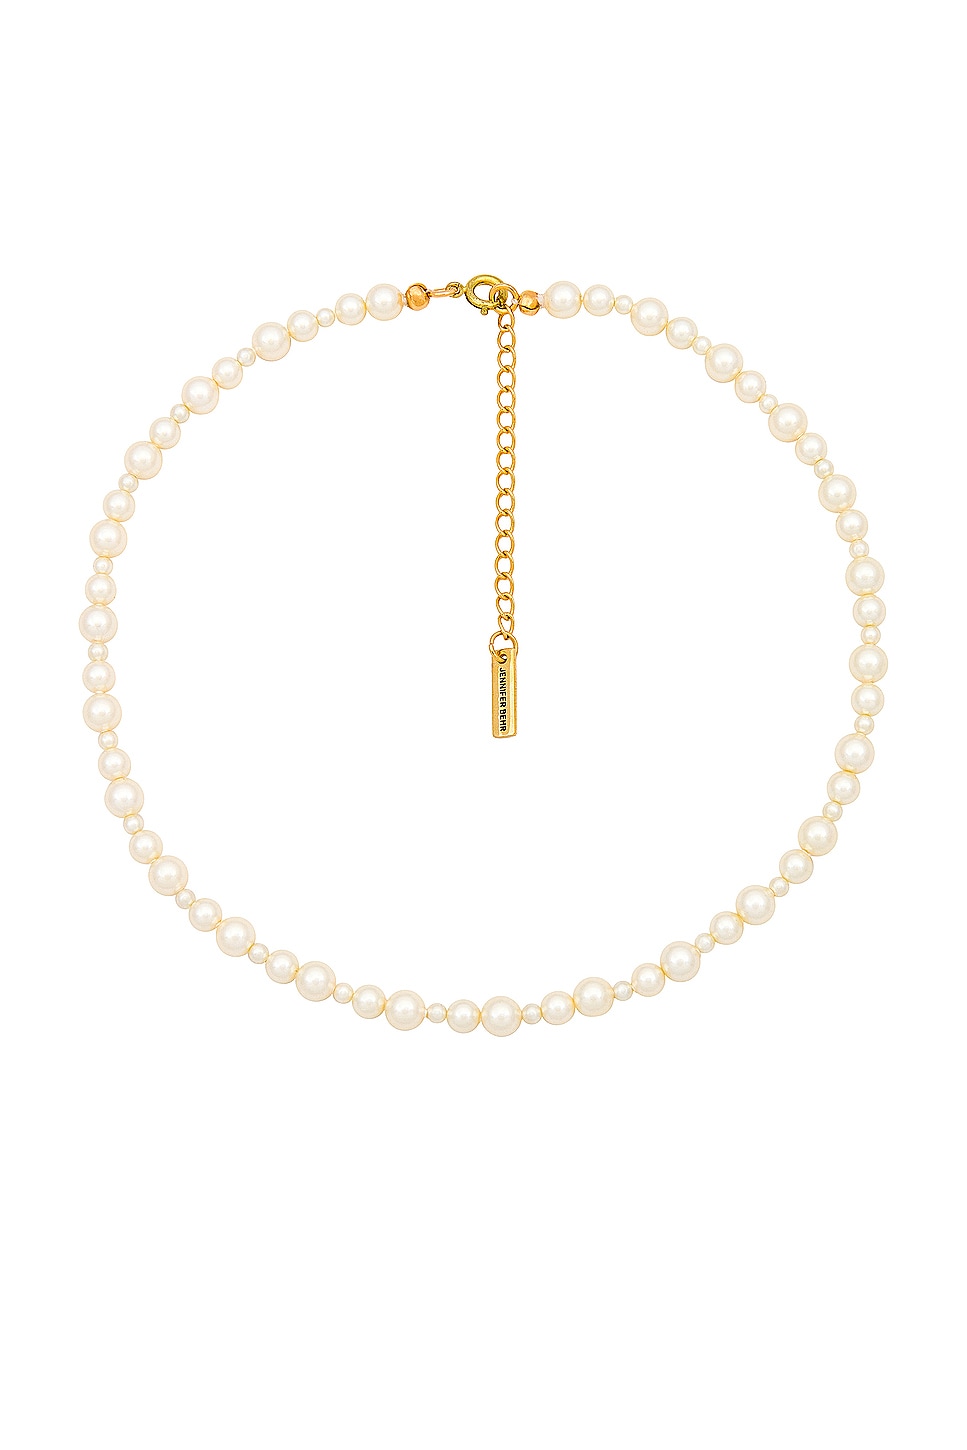 Image 1 of Jennifer Behr Bailey Necklace in Pearl